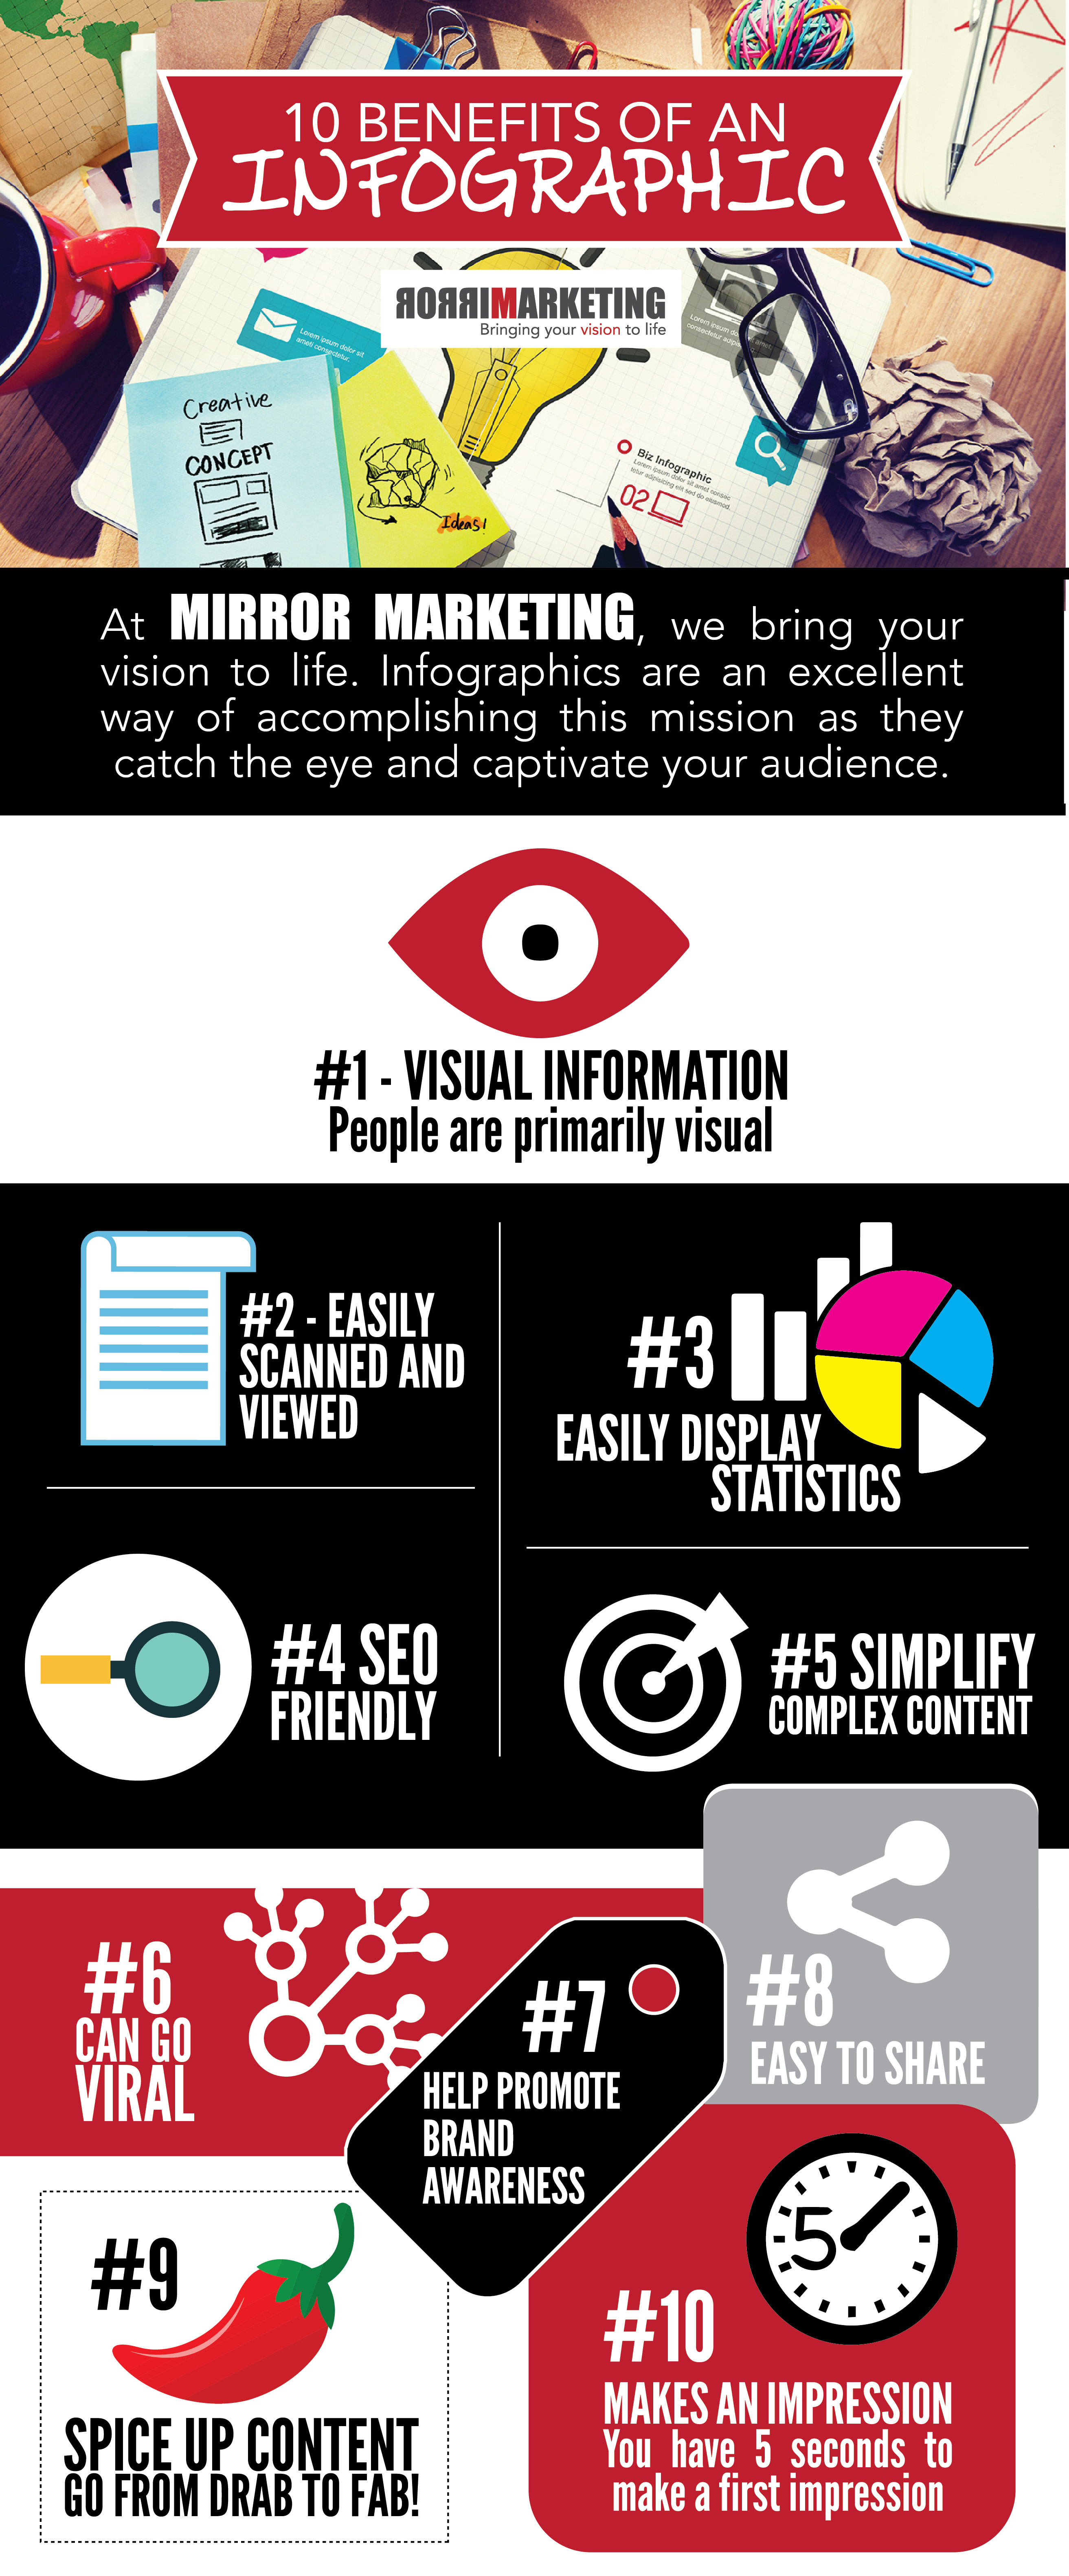 10 Benefits to using an INFOGRAPHIC